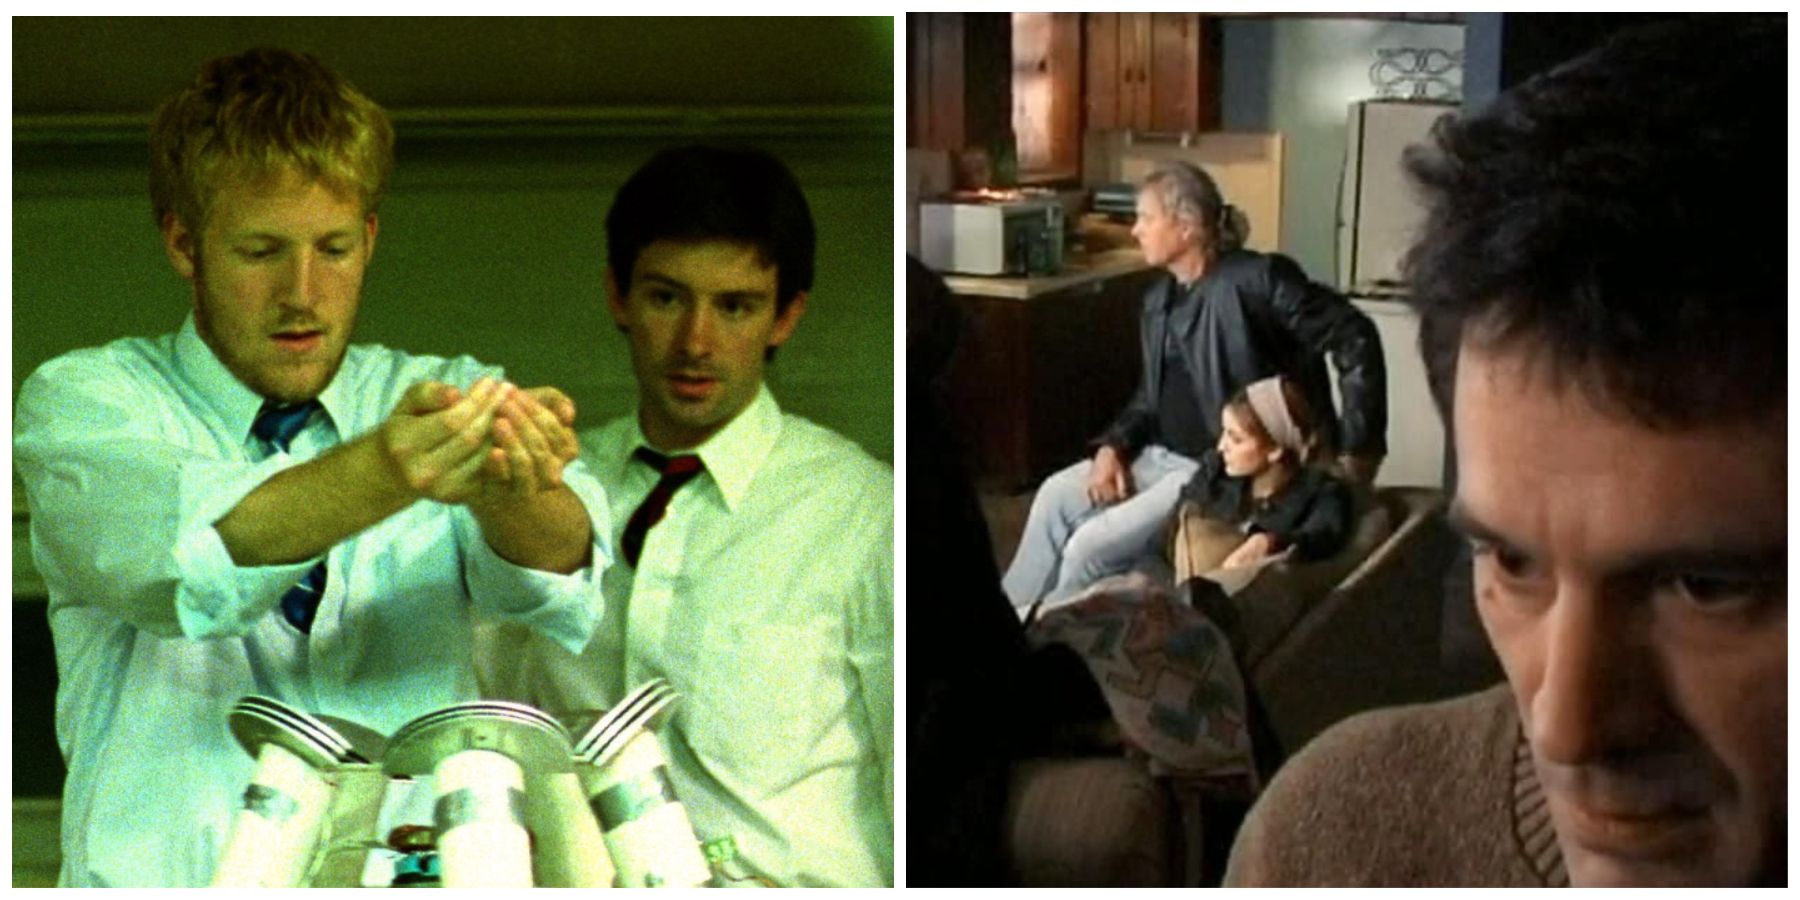 Two scenes from the movie "Primer" (2004)